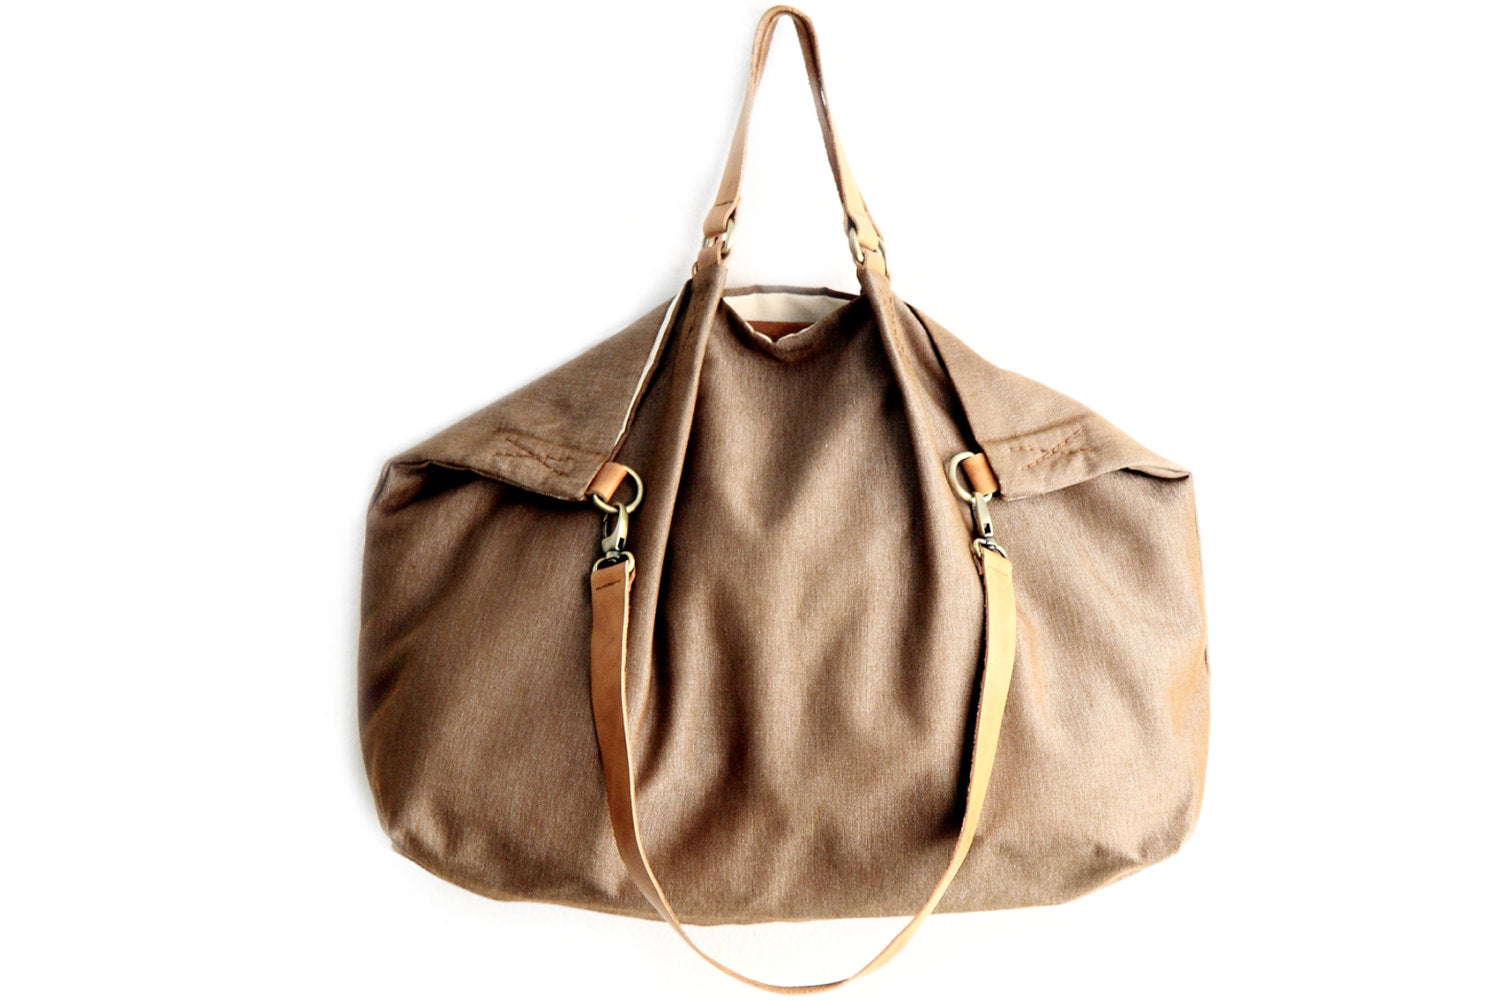 Weekend bag canvas and leather shoulder bag, brown. Personalized